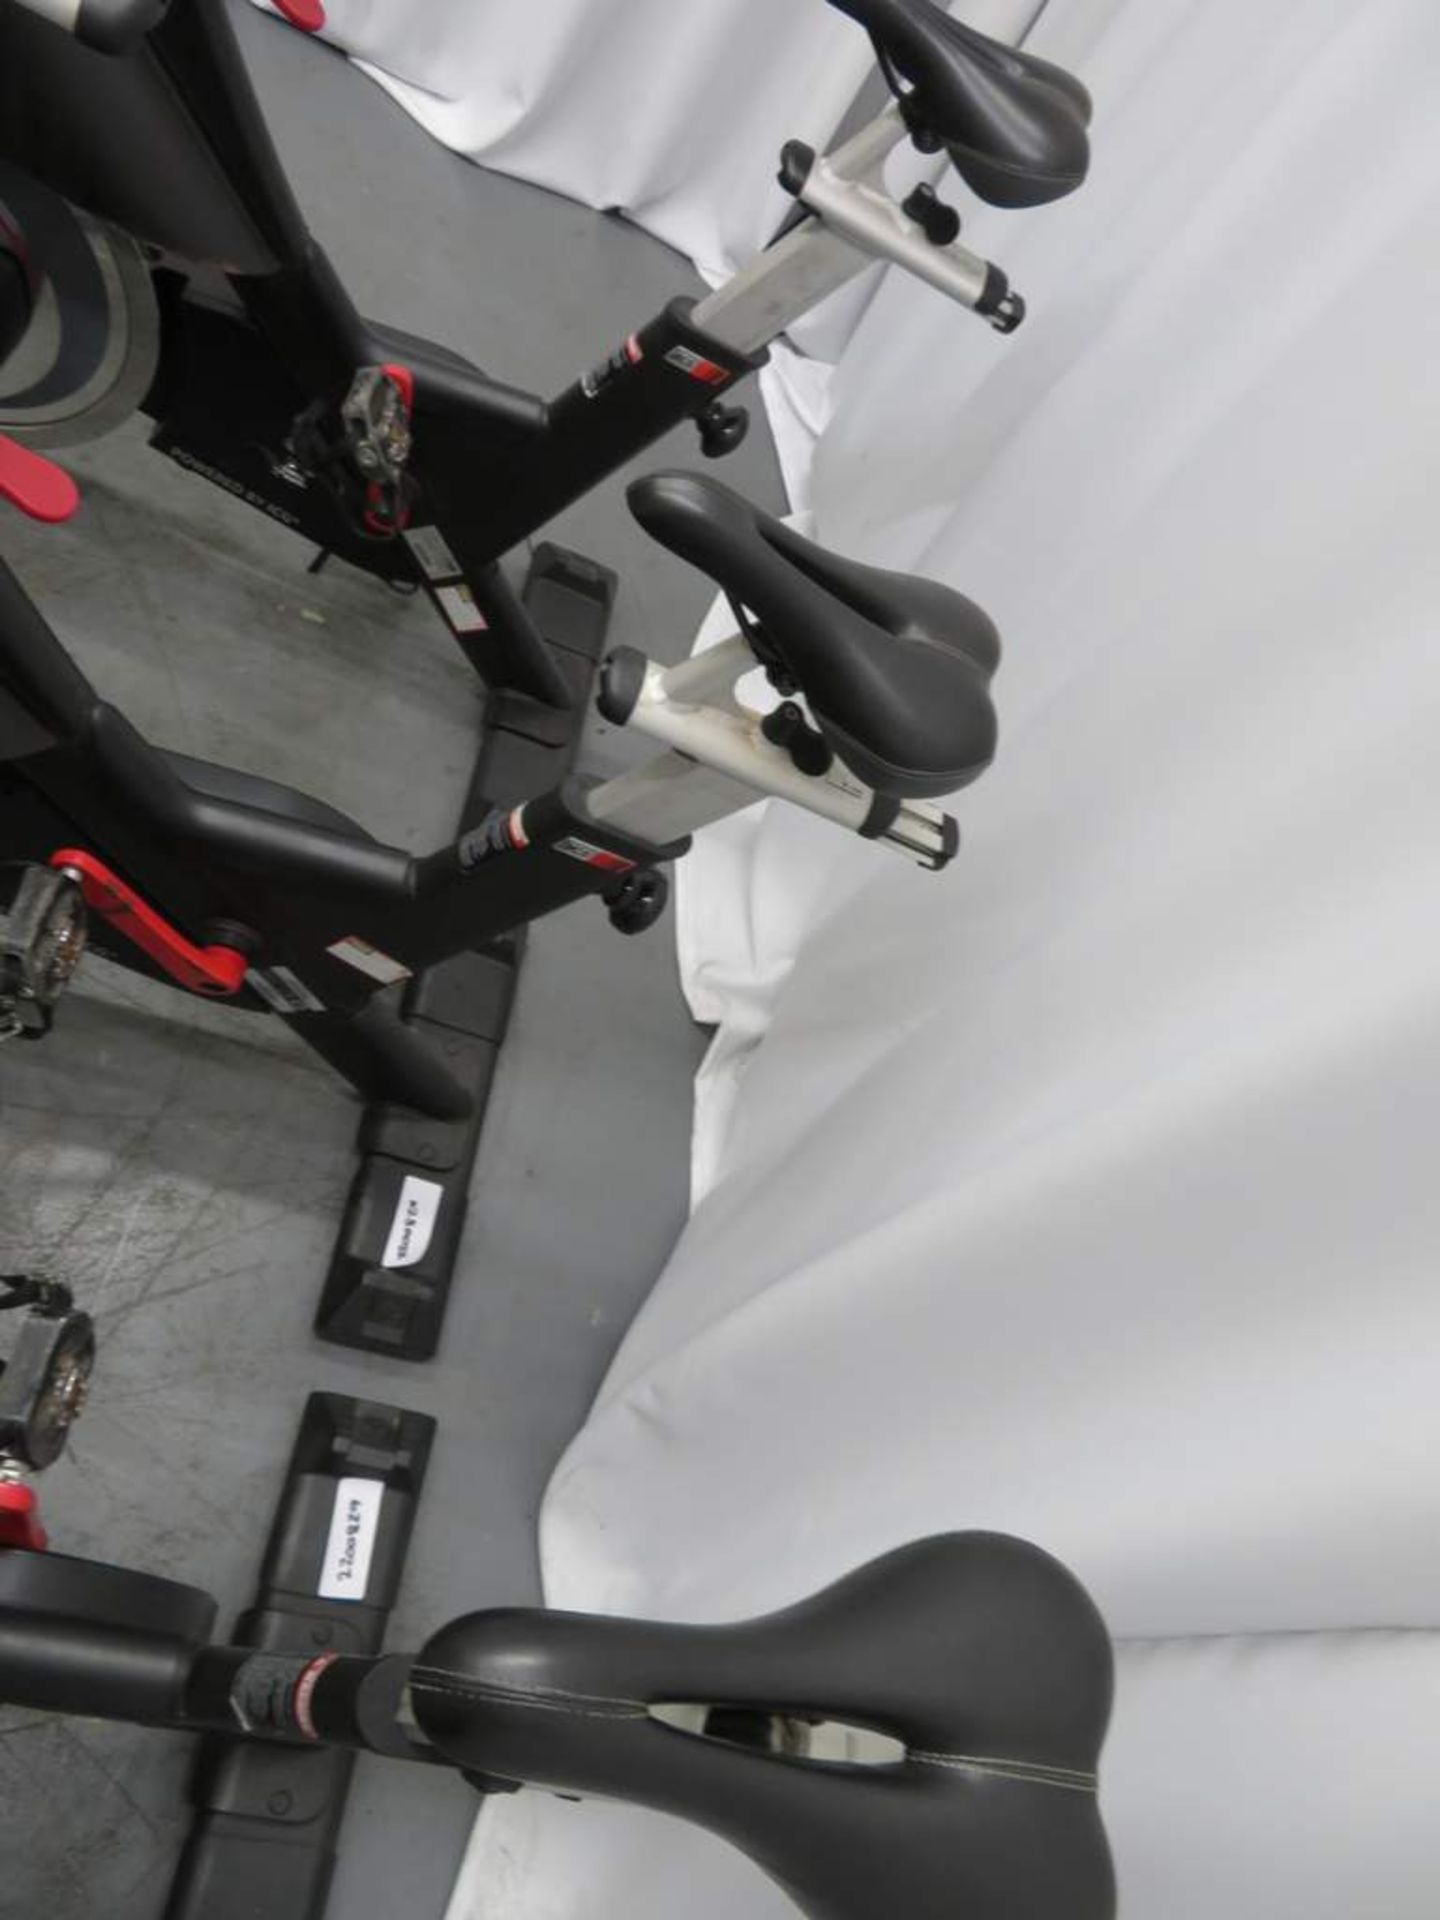 3x Matrix Model: IC3 Series Spin Bike, Complete With Digital Console. - Image 6 of 10